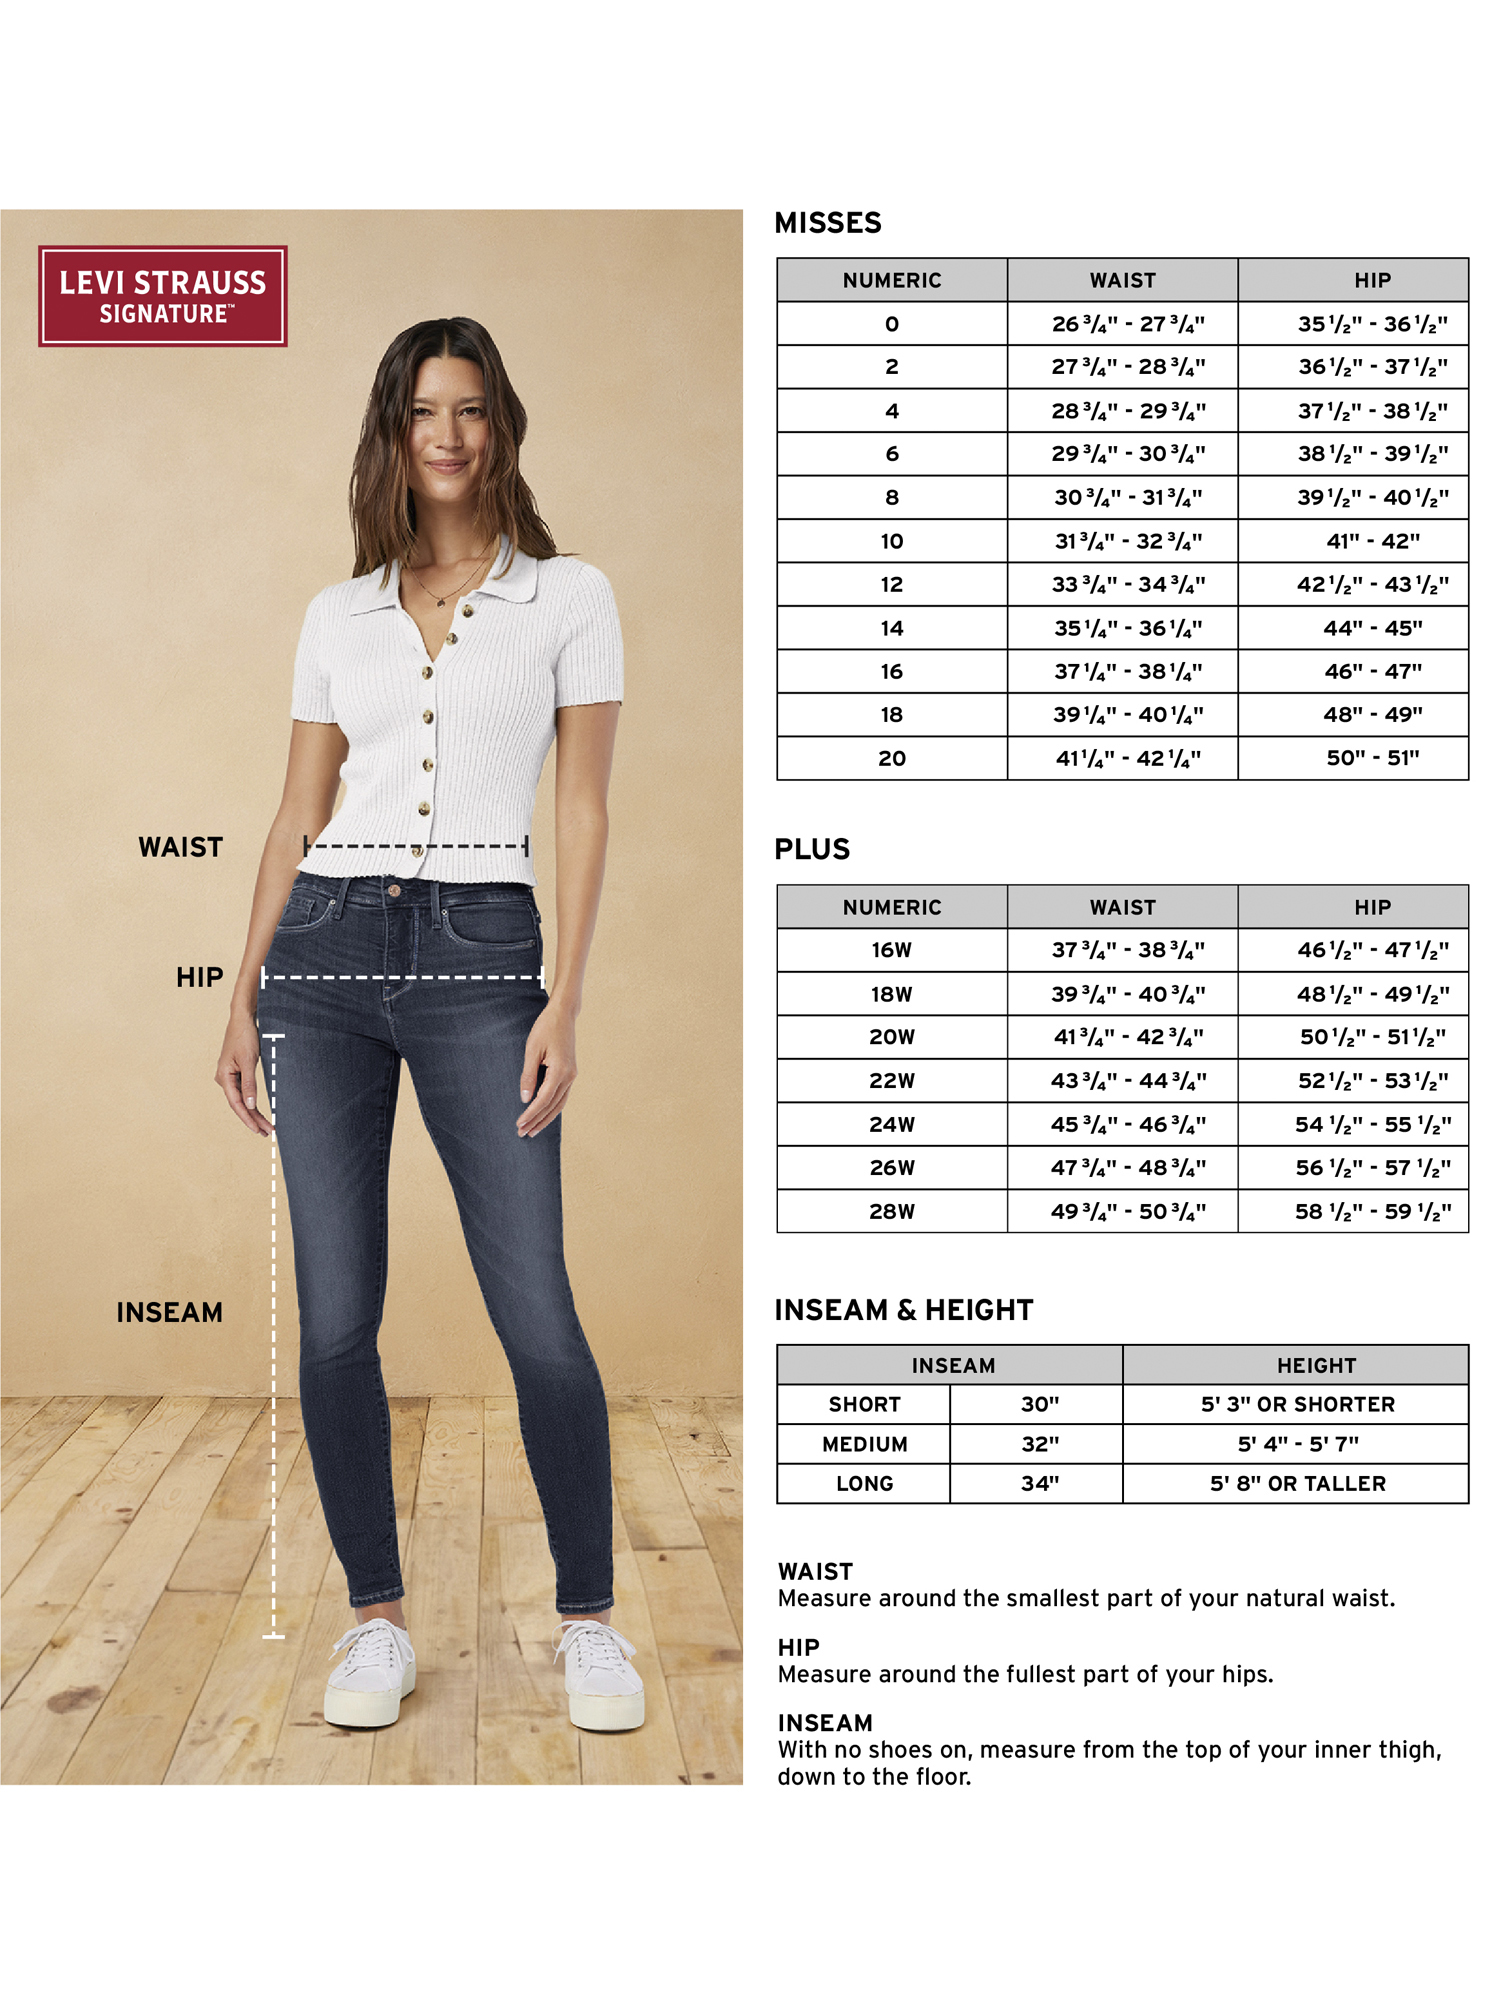 Signature by Levi Strauss & Co. Women's and Women's Plus Mid Rise Skinny Jeans - image 5 of 6